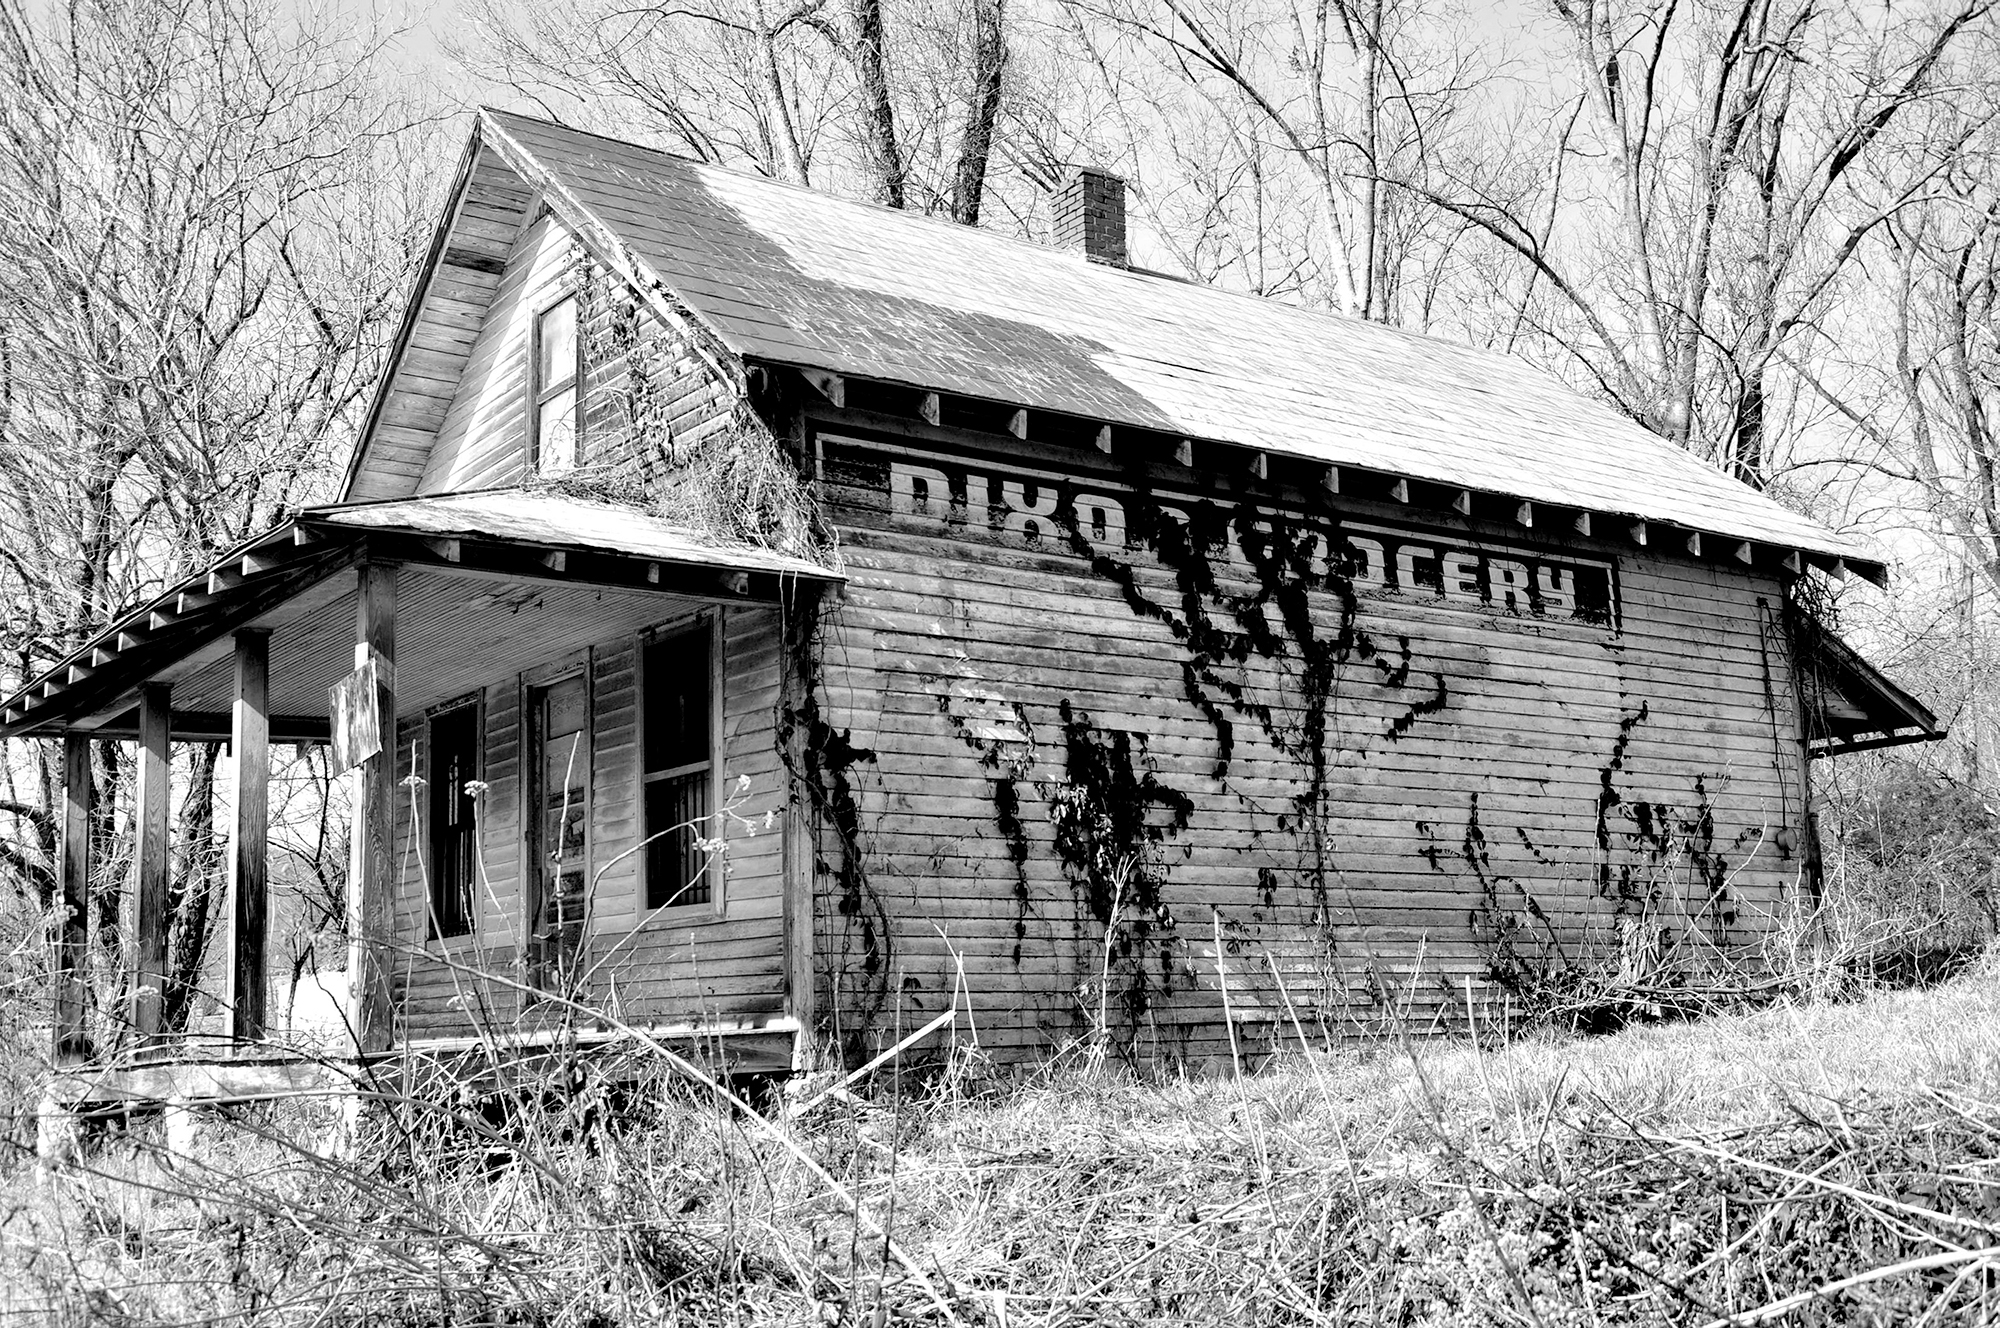 Disappearing Appalachia Our Tennessee